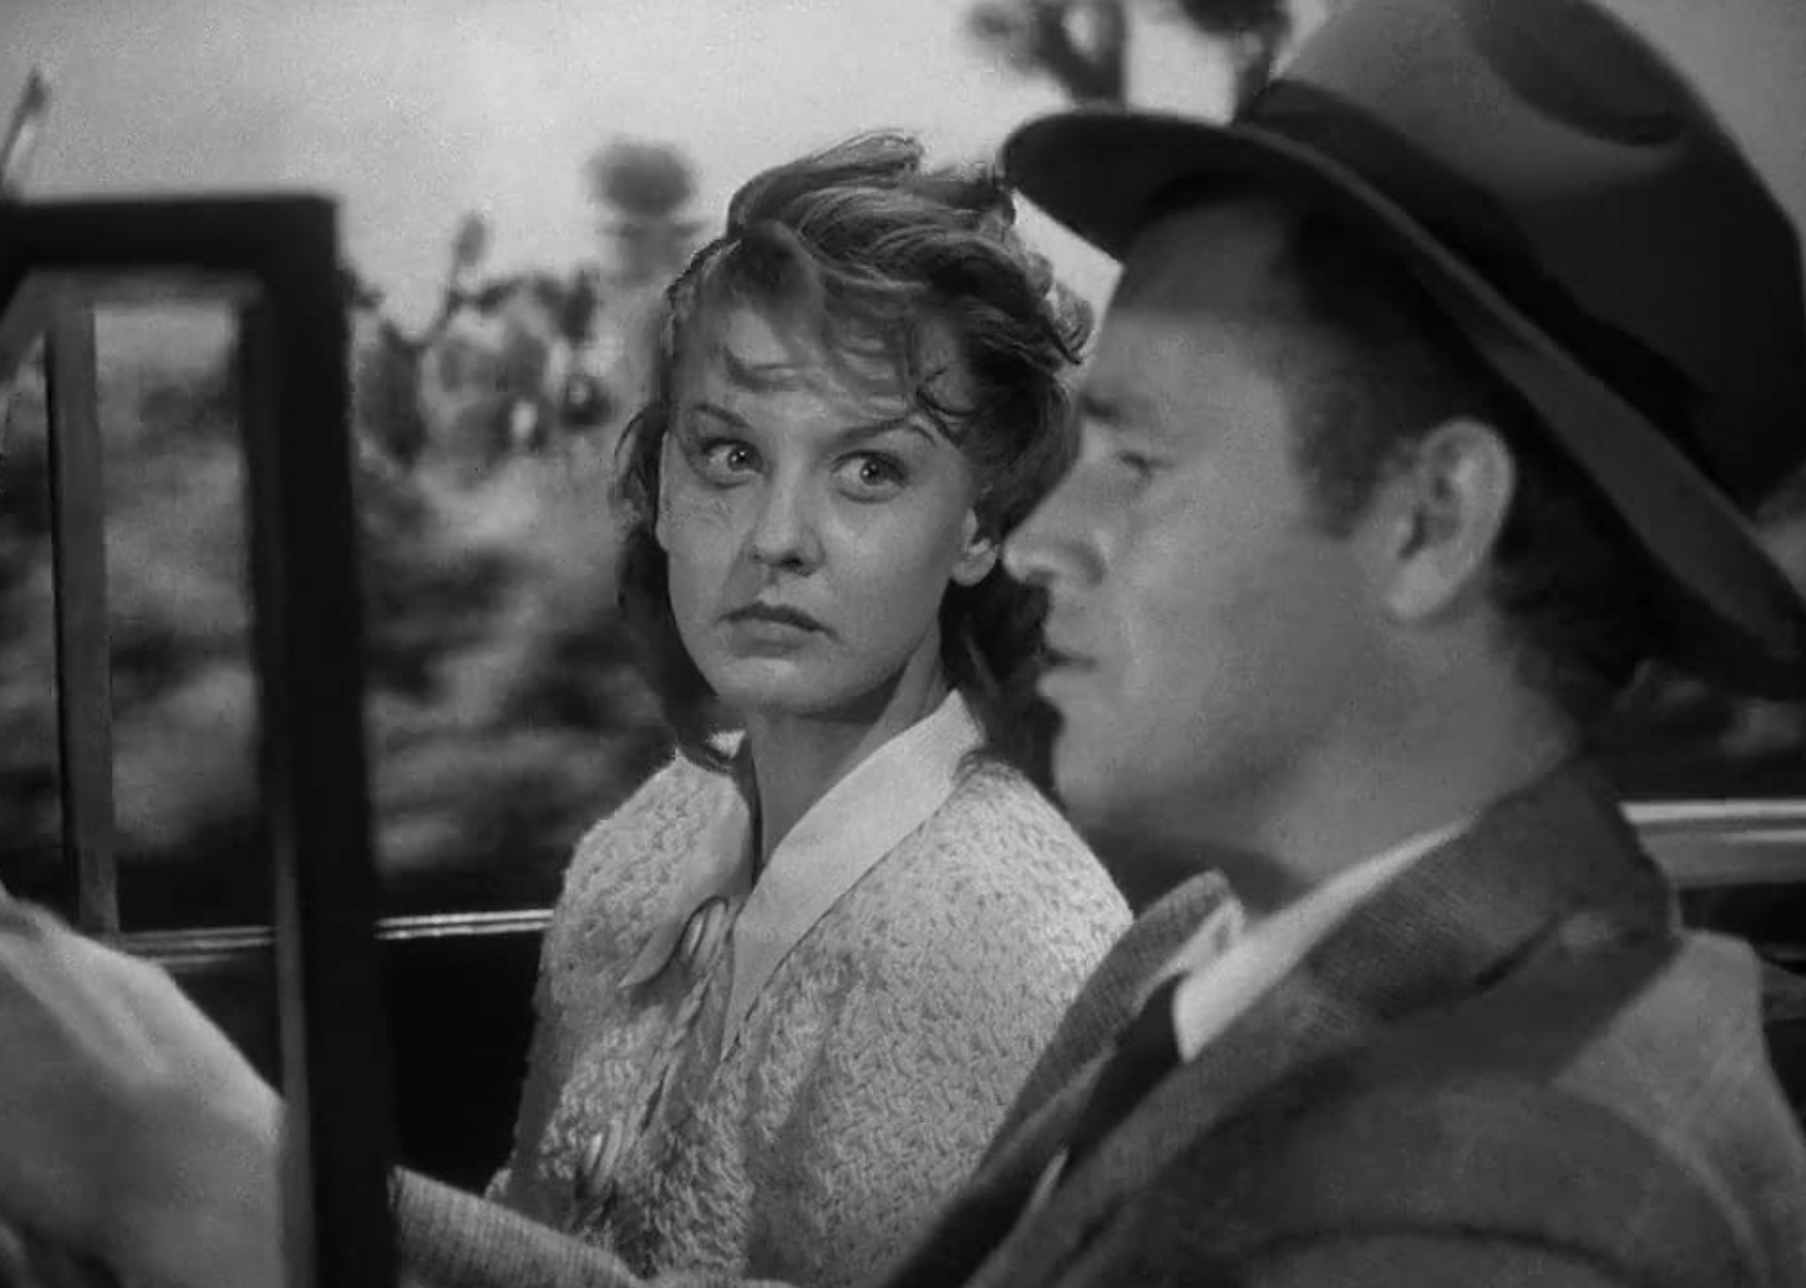 Tom Neal and Ann Savage in "Detour".